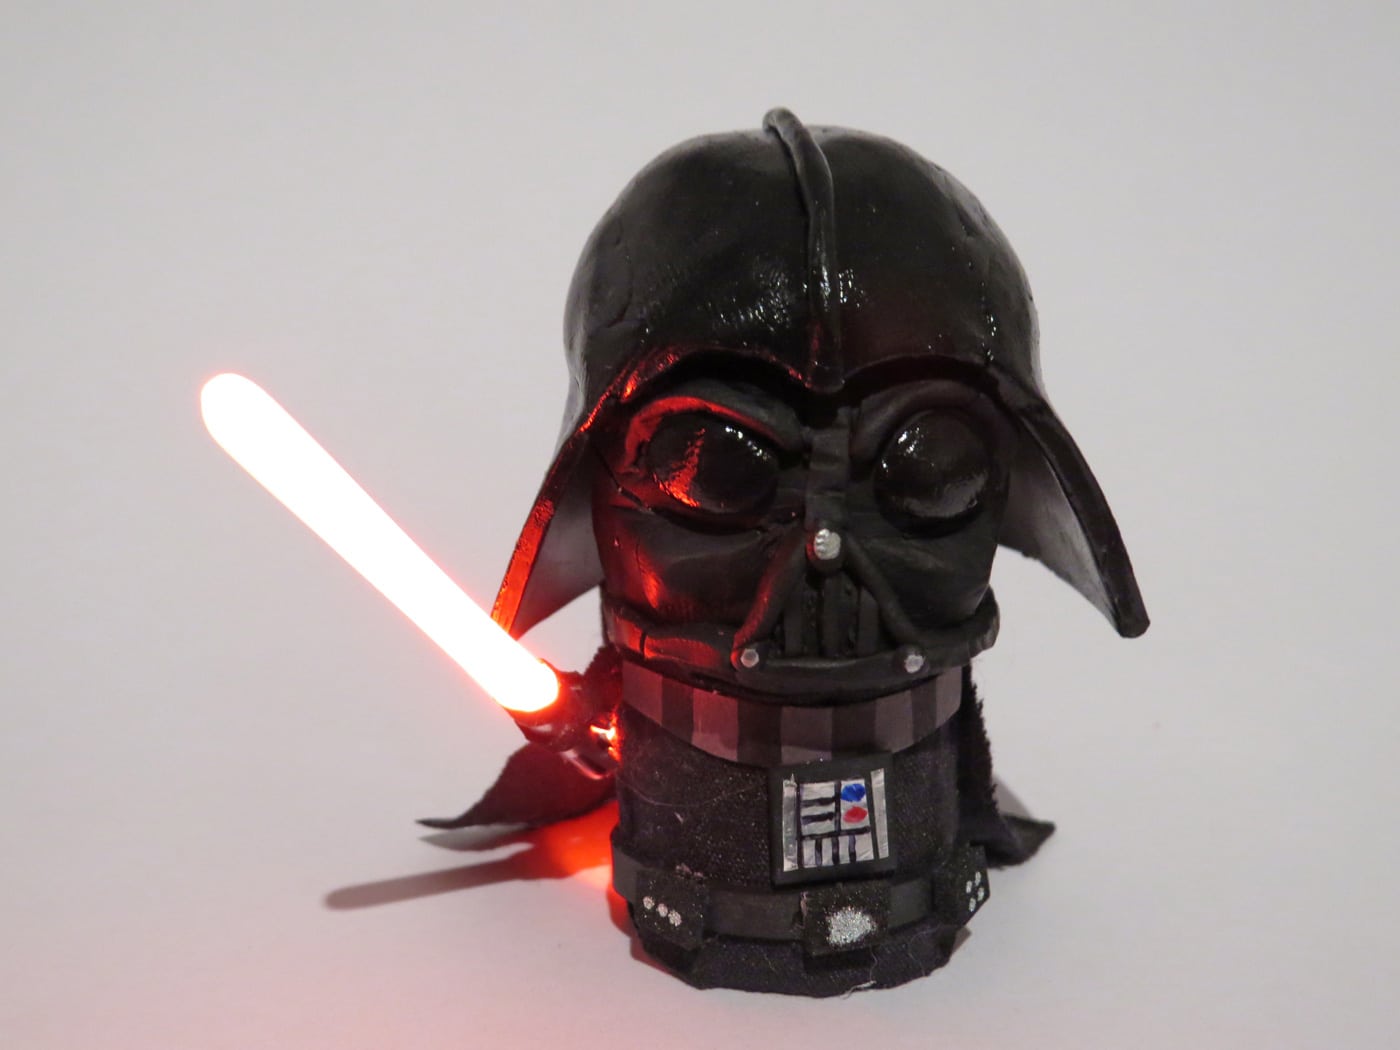 Geeky DIY Vader Champagne Cork: Drink From The Dark Side